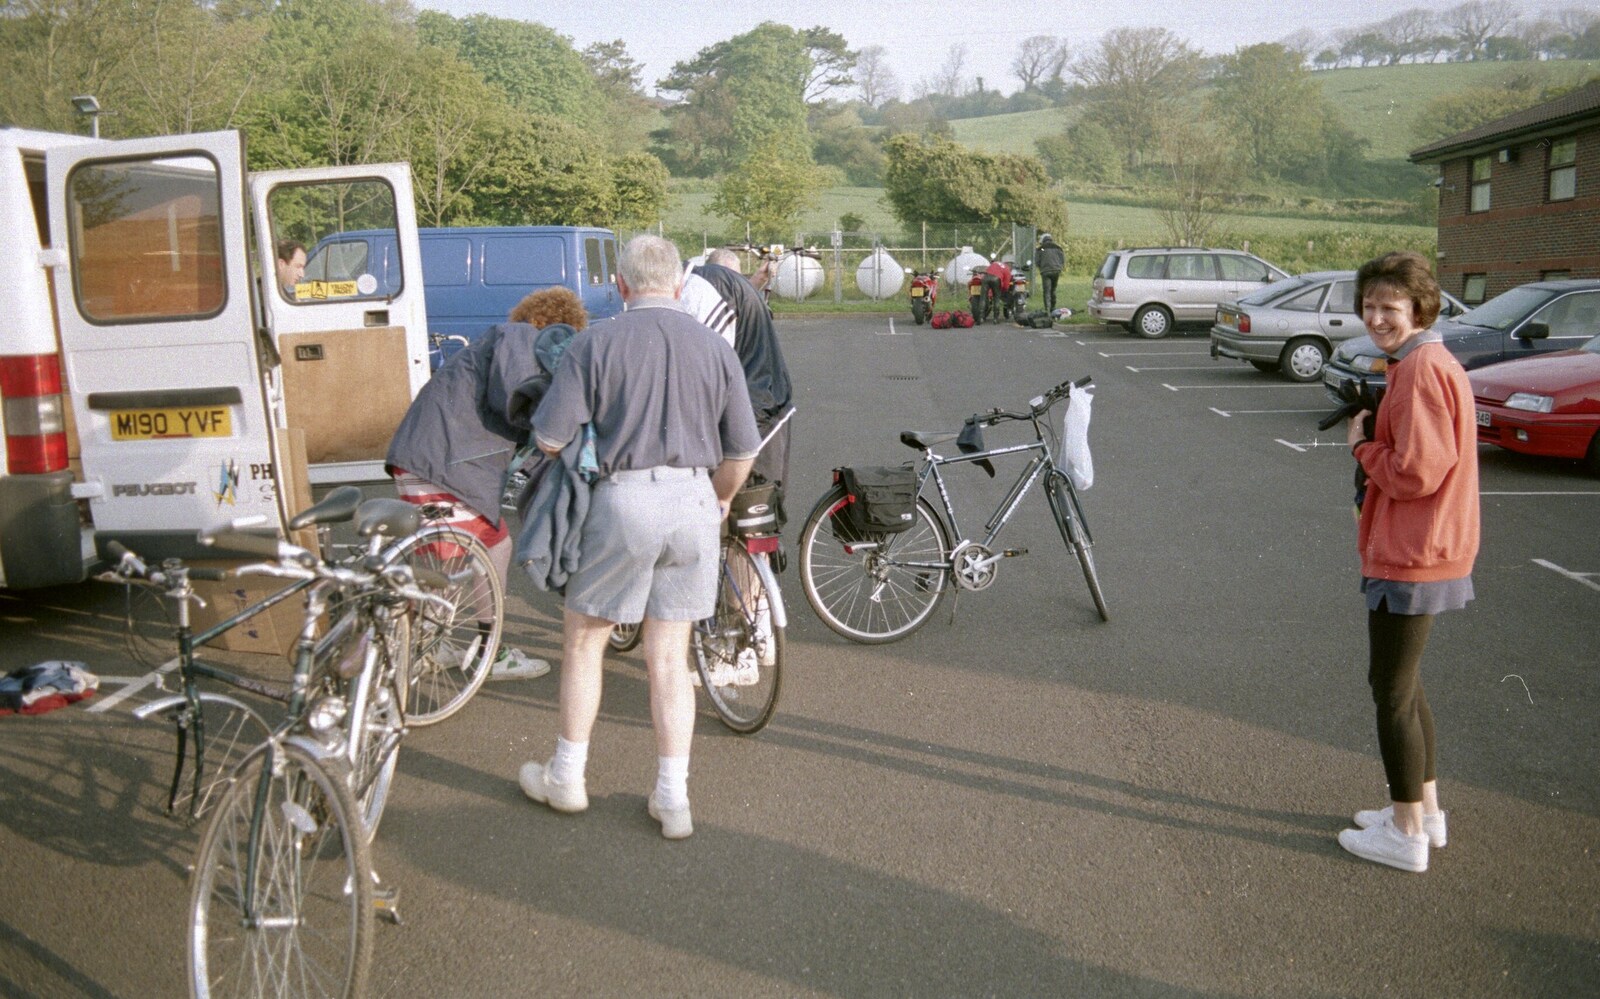 Jill mills around watching the preparations from A BSCC Bike Ride to Gravelines, Pas de Calais, France - 11th May 2000